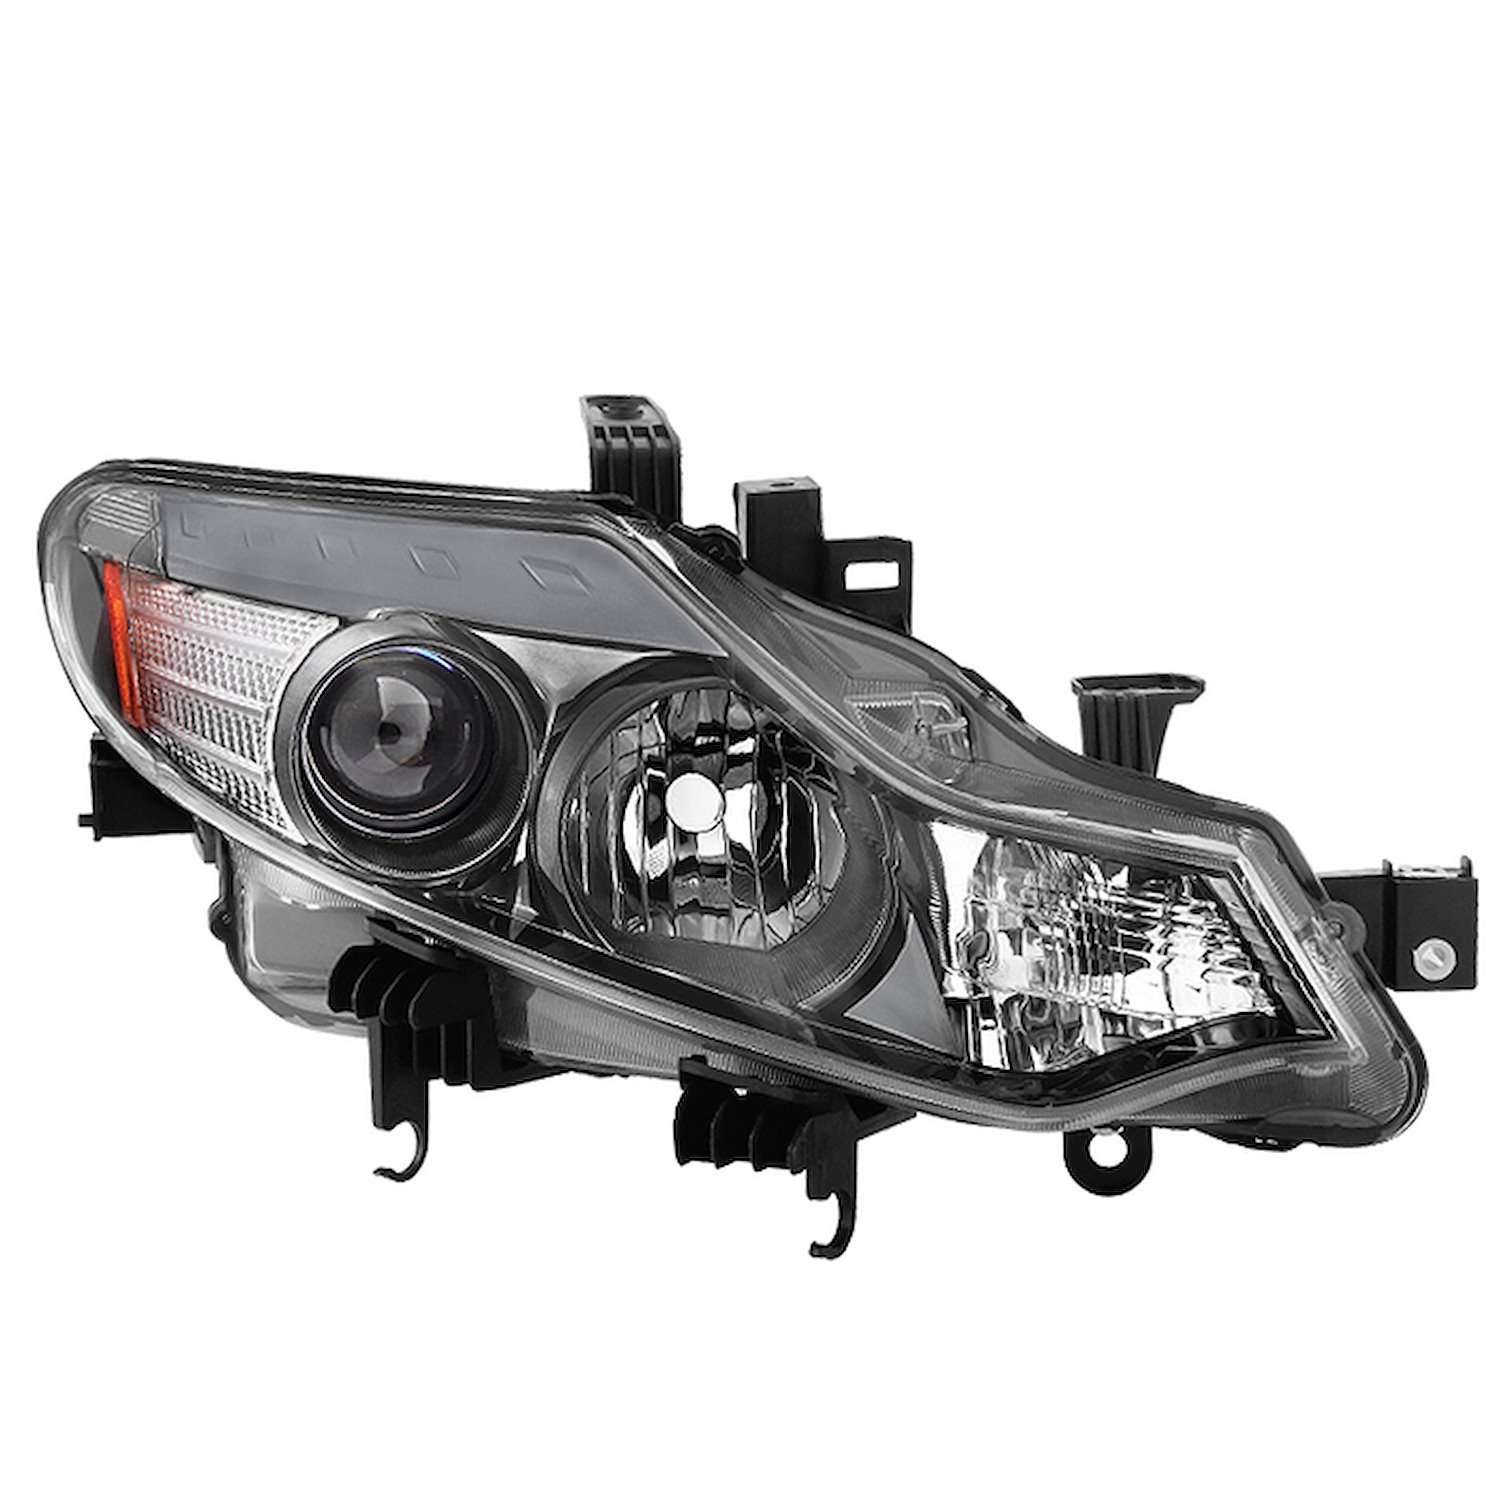 xTune OEM Style Crystal Headlights 2009-2014 for Nissan